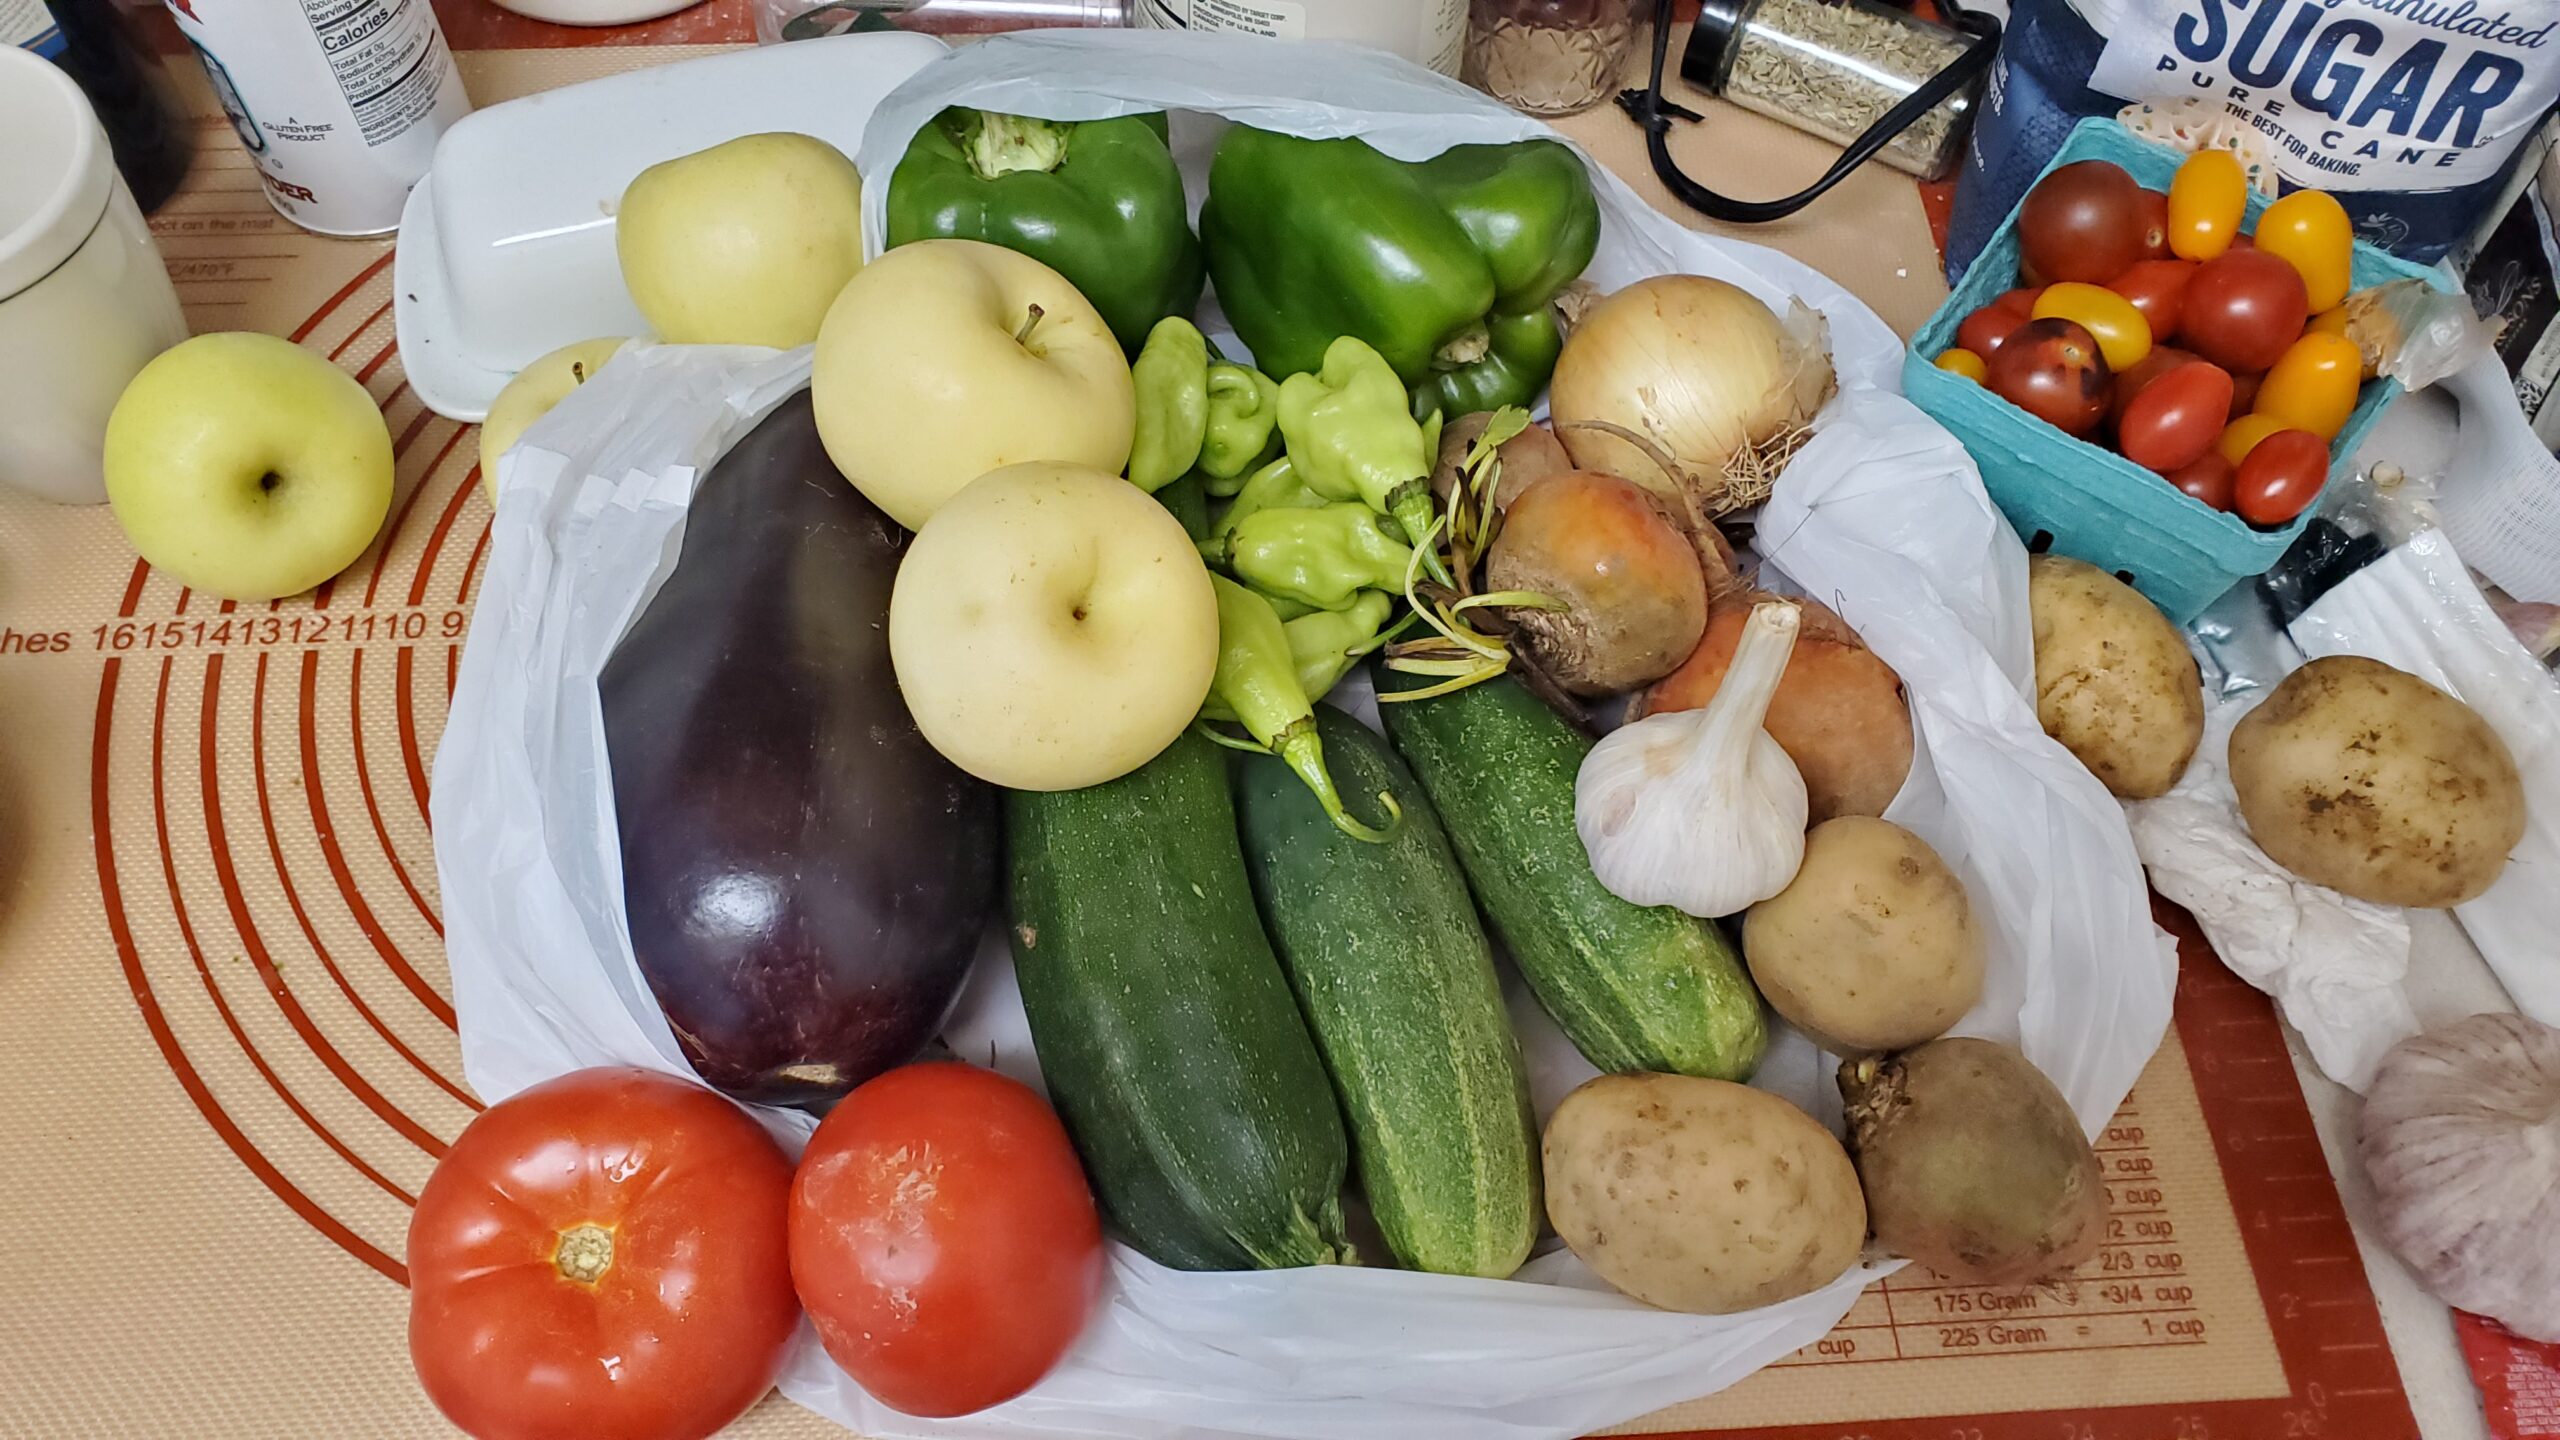 Photo of produce spilling out of a plastic bag on a kitchen countertop: tomatoes, eggplant, apples, peppers, zucchini, tomatoes, potatoes.